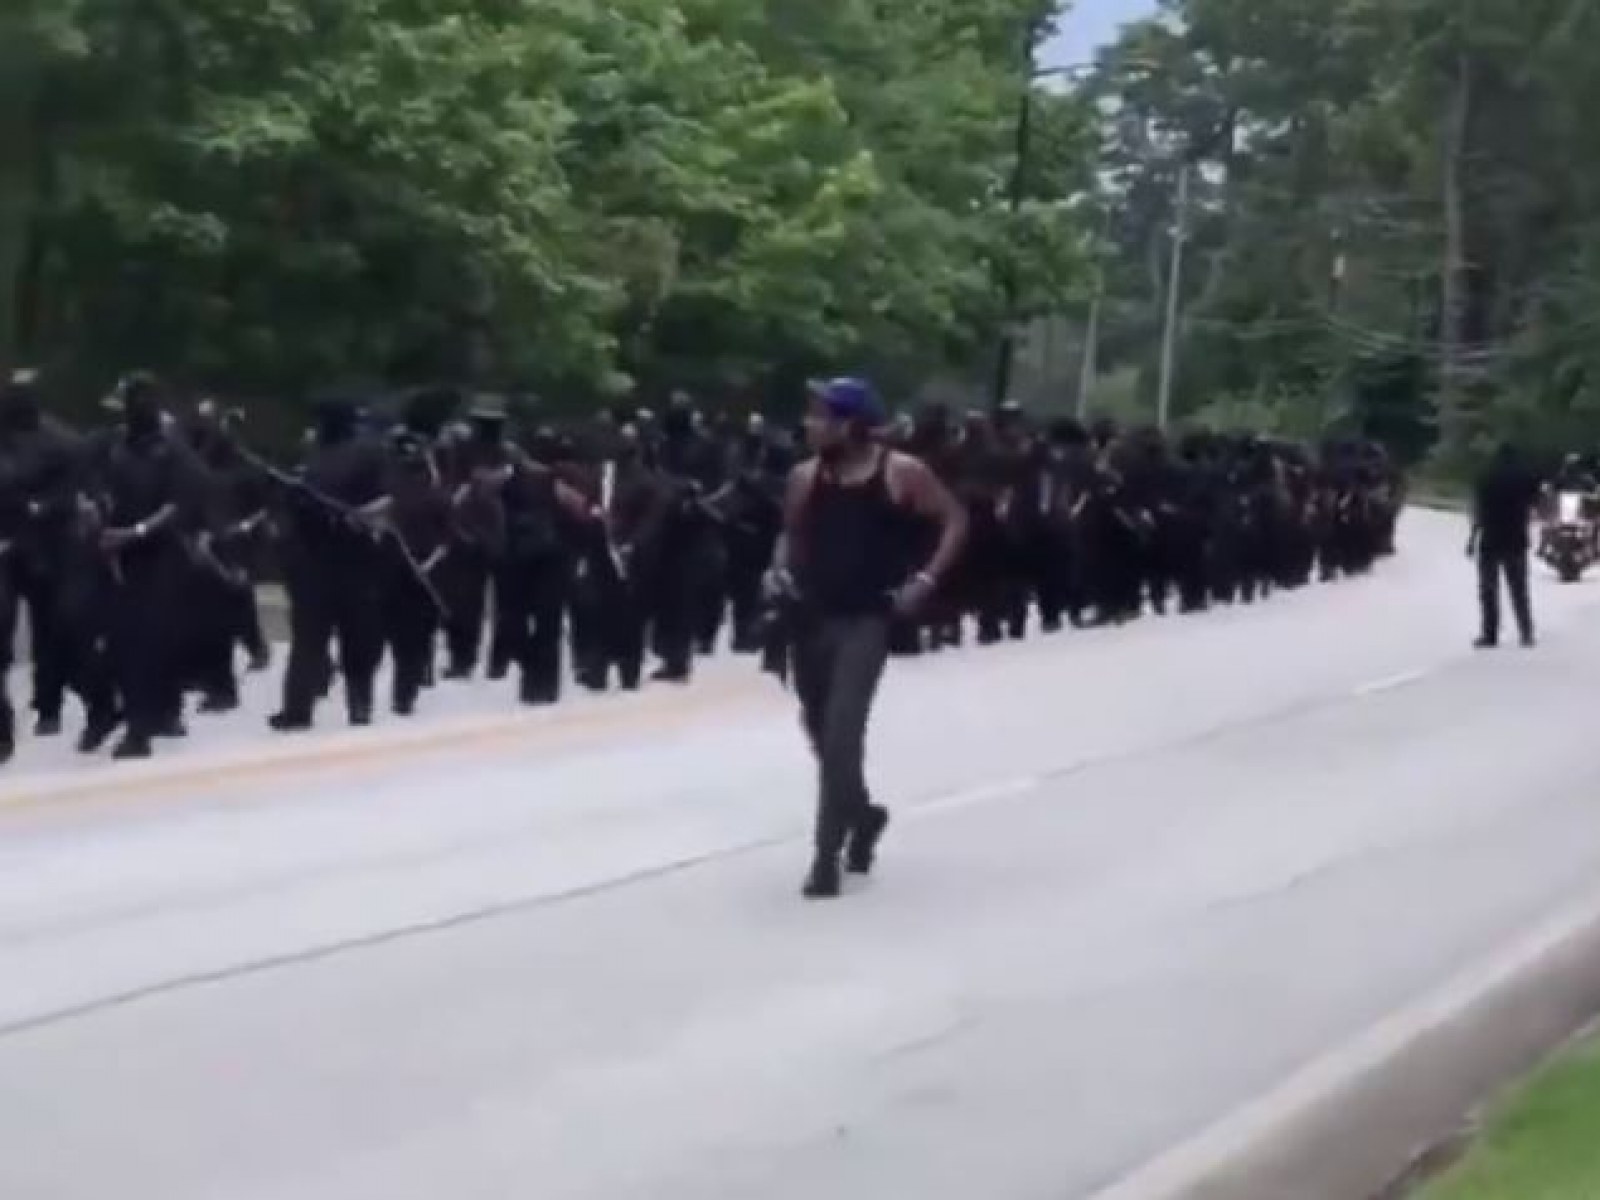 Wow! NFAC Black nationalist armed militia challenges far-right